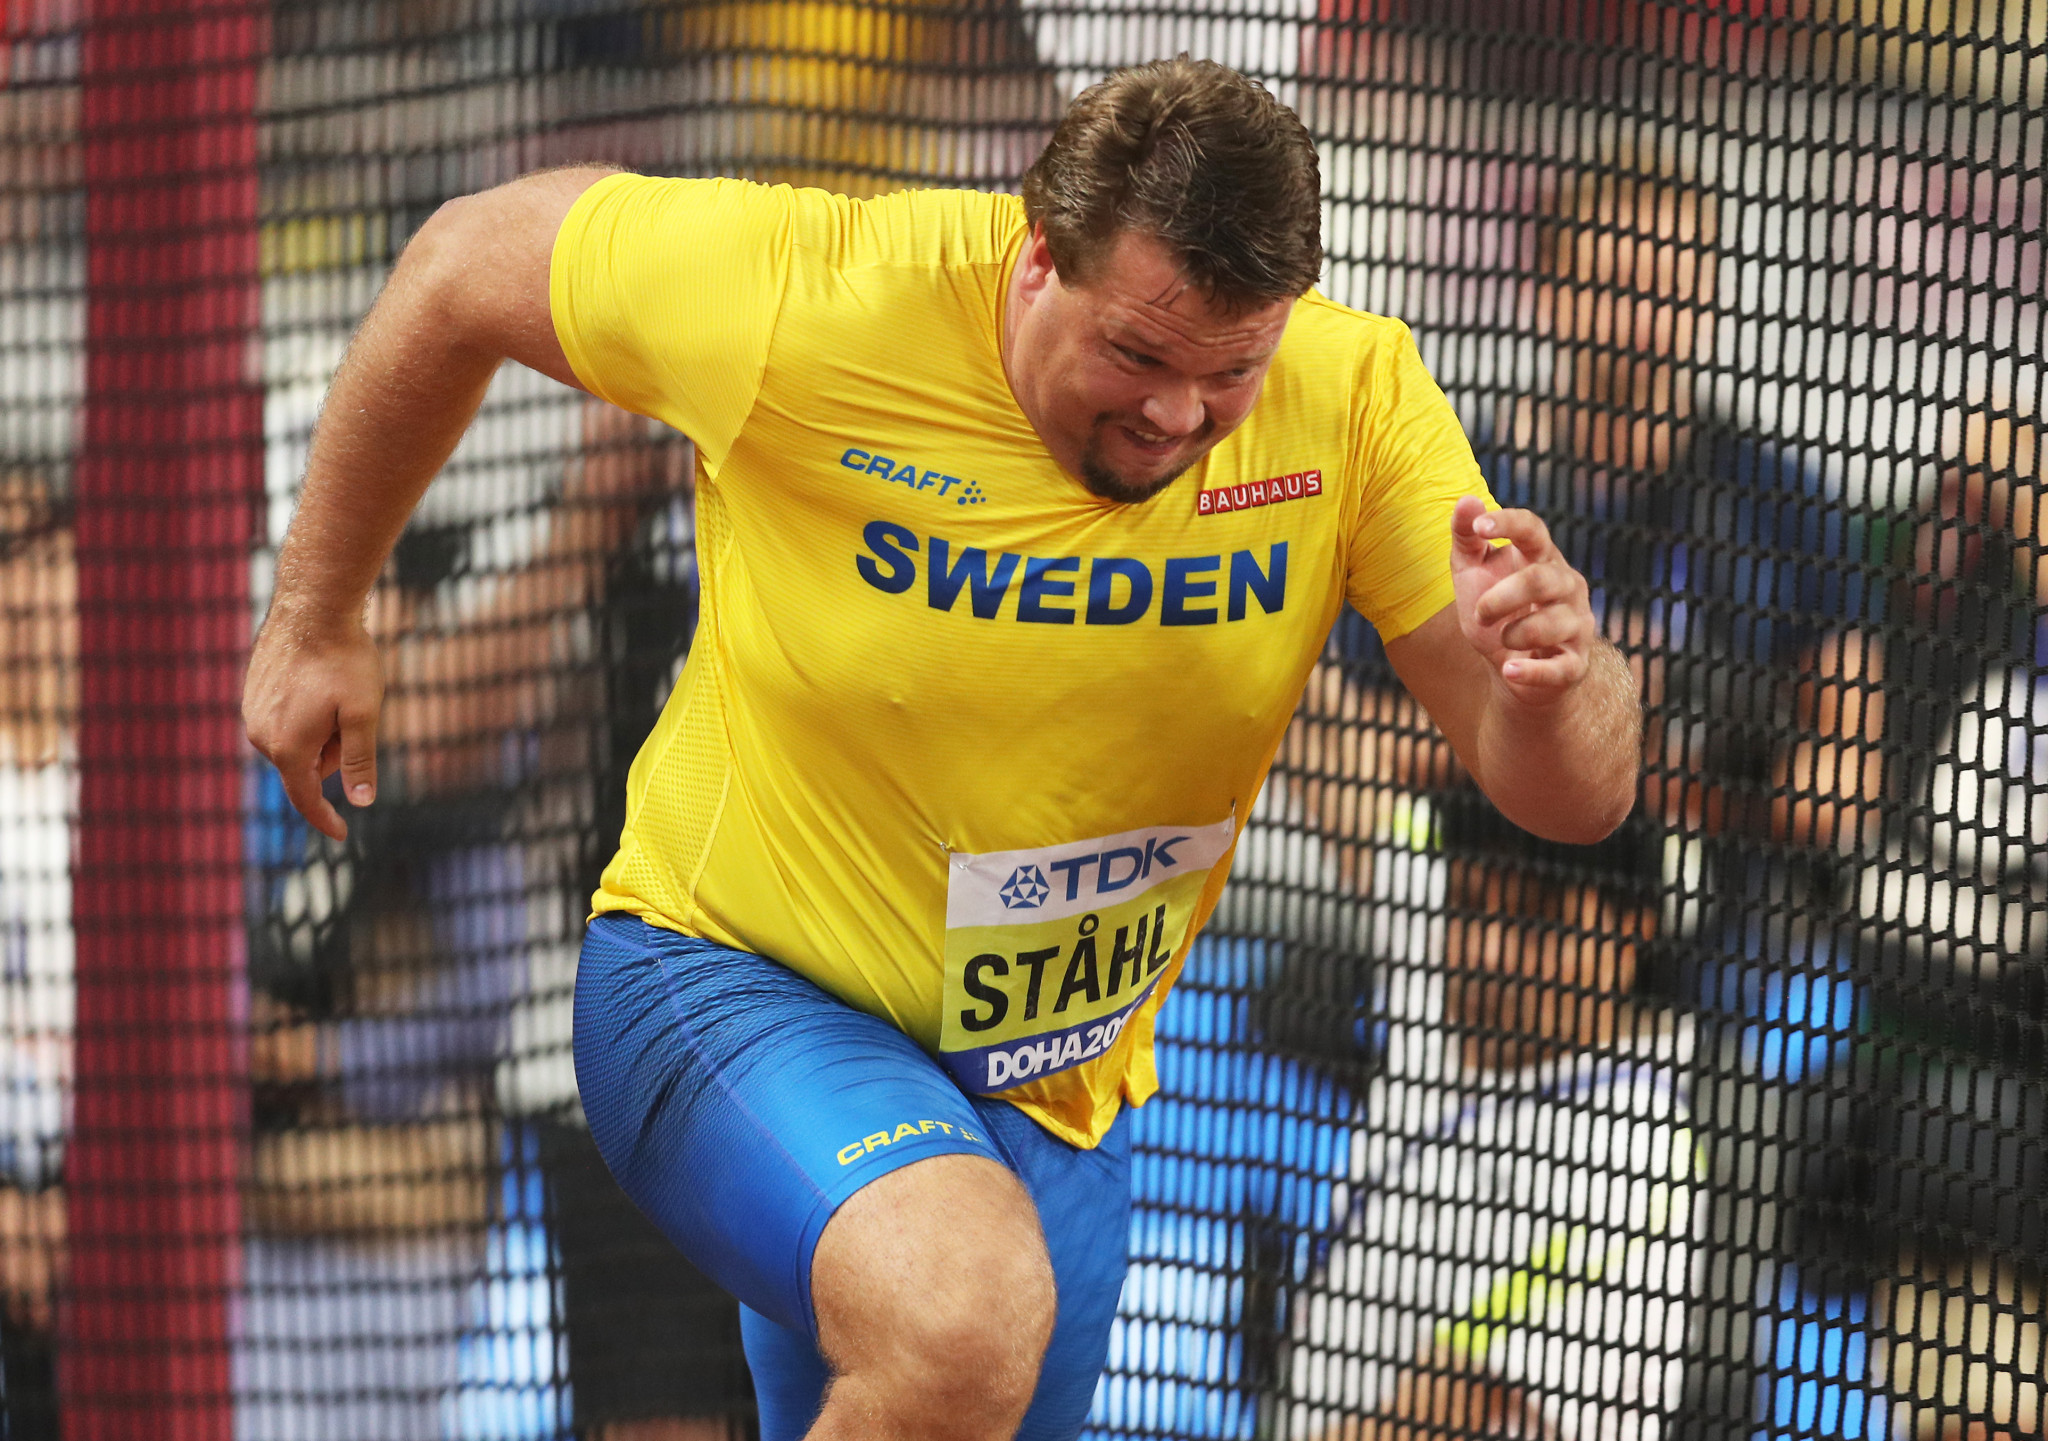 Sweden's Daniel Stahl did a fairly good impression of a top-class sprinter as he celebrated his victory in the discus ©Getty Images